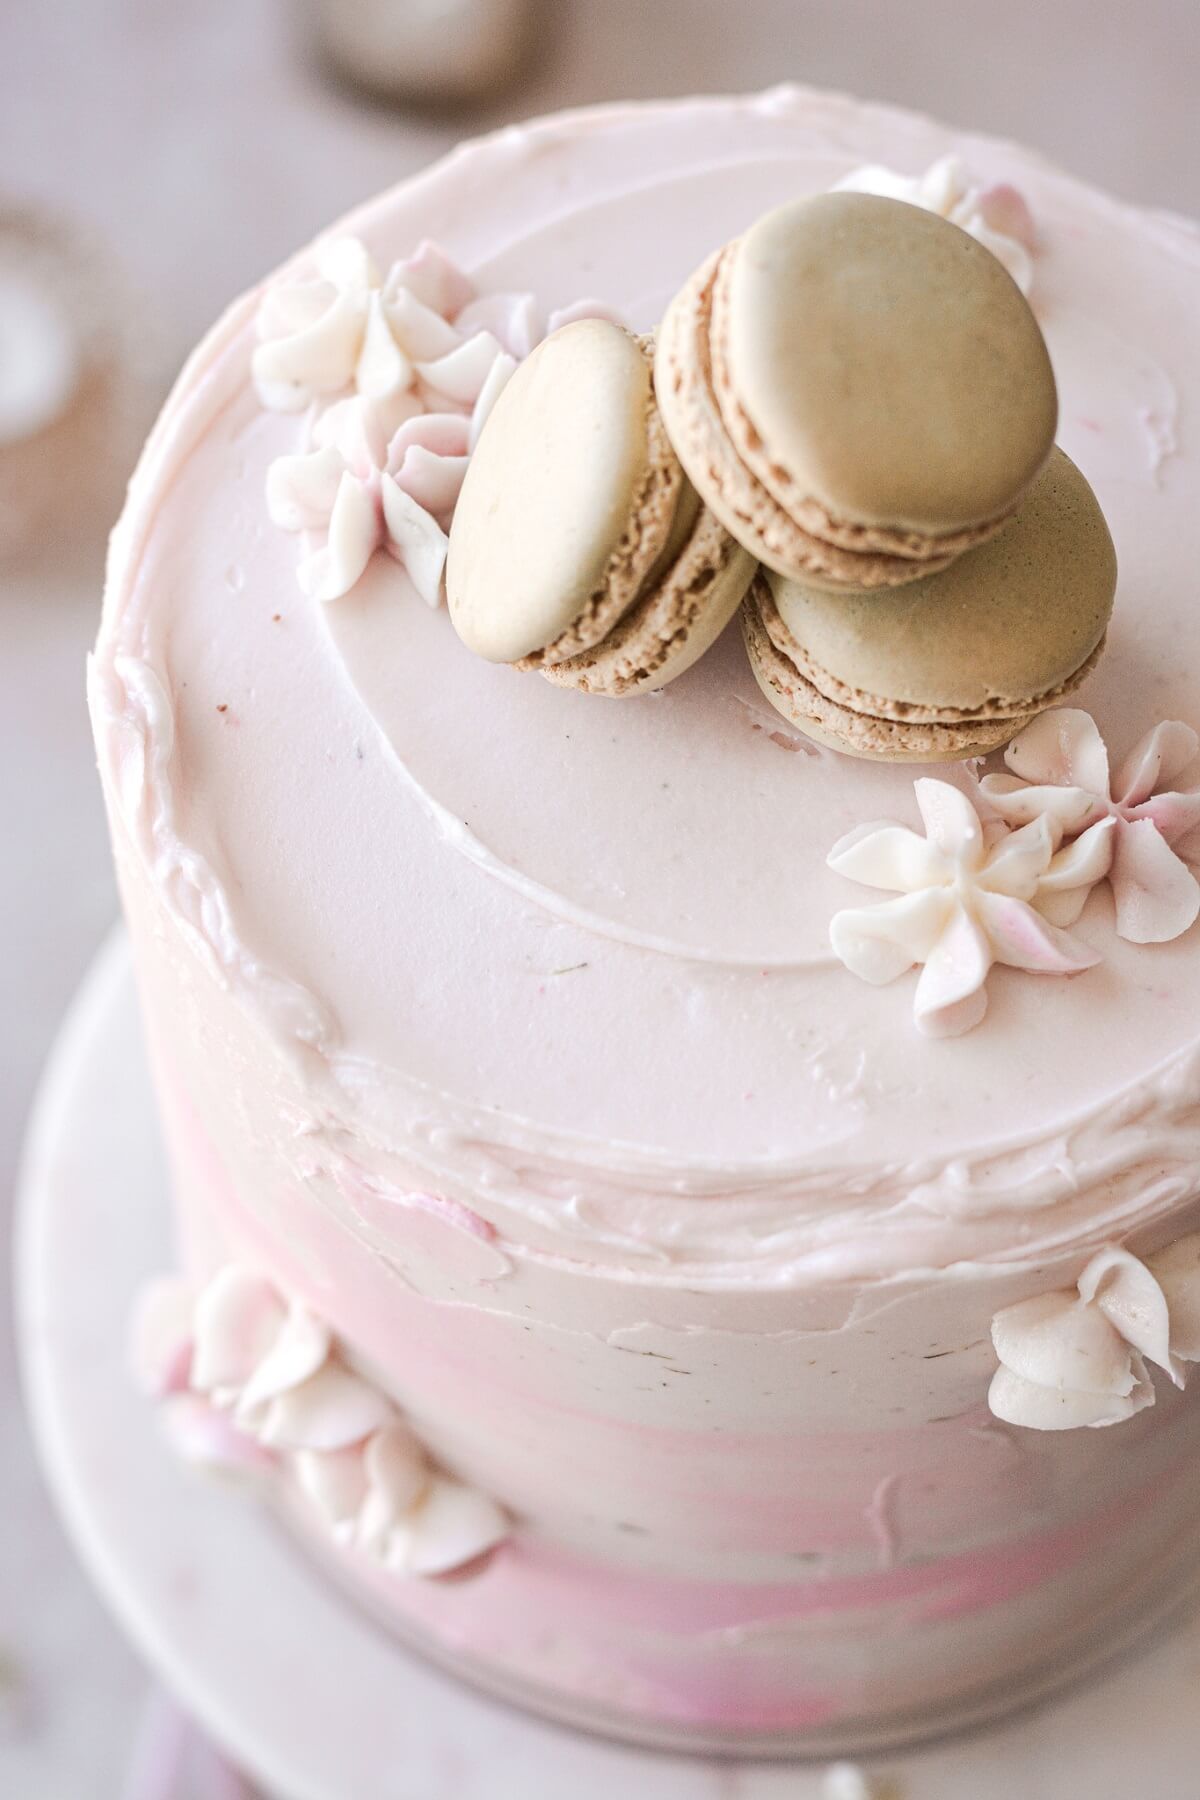 Macarons and piped flowers on a pink watercolor cake.